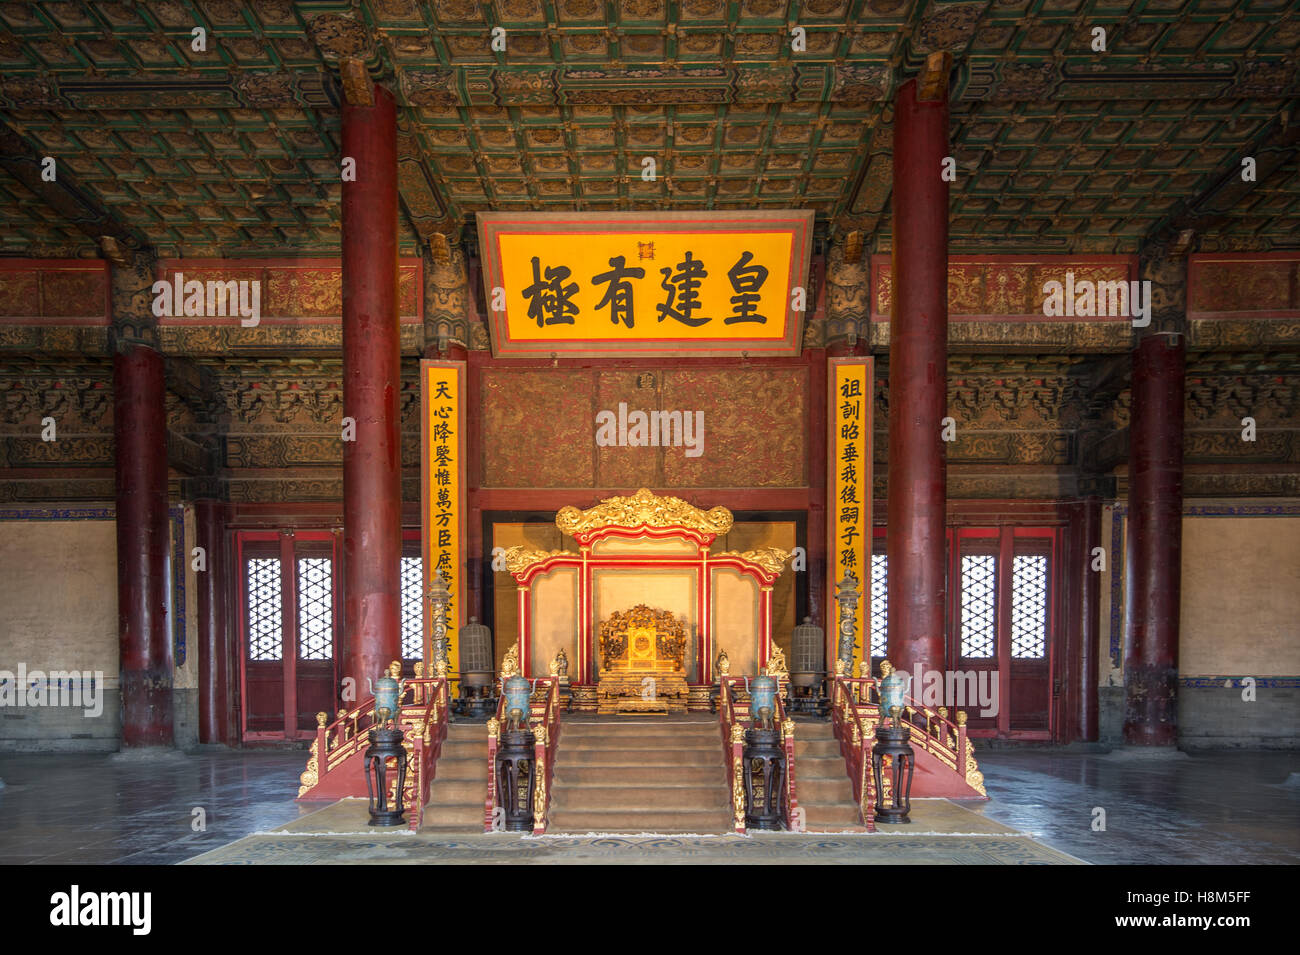 Beijing China - Ornately decorated Emperor's throne room in the Palace Museum located in the Forbidden City. Stock Photo